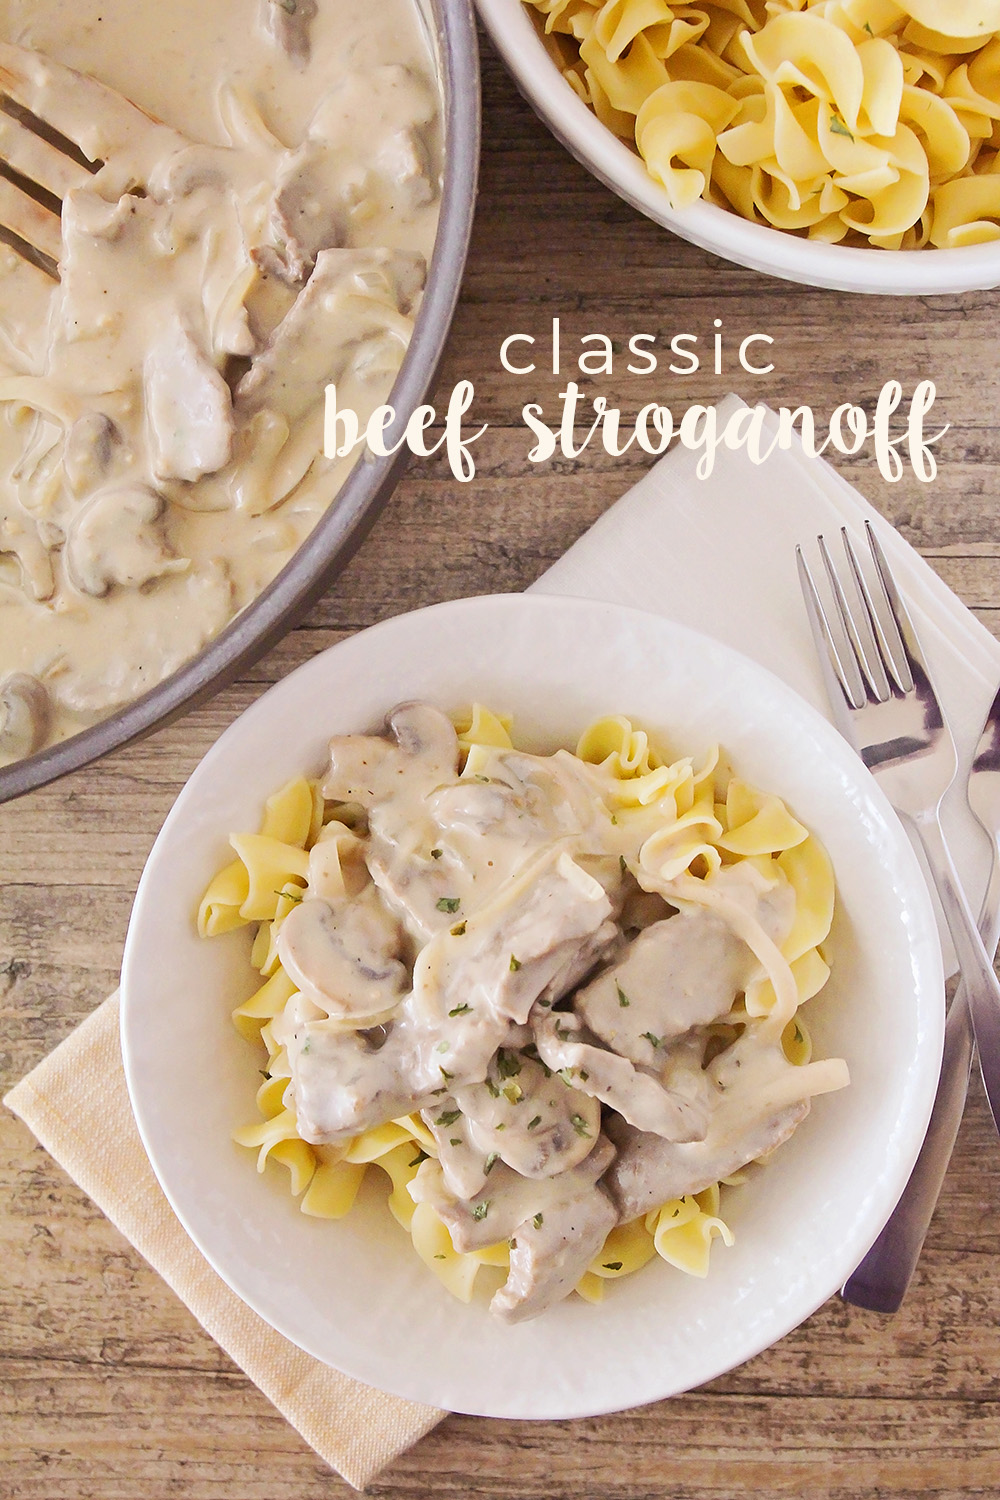 This classic beef stroganoff is so savory and filling! It's the perfect easy dinner for a busy night, and one the kids will love!